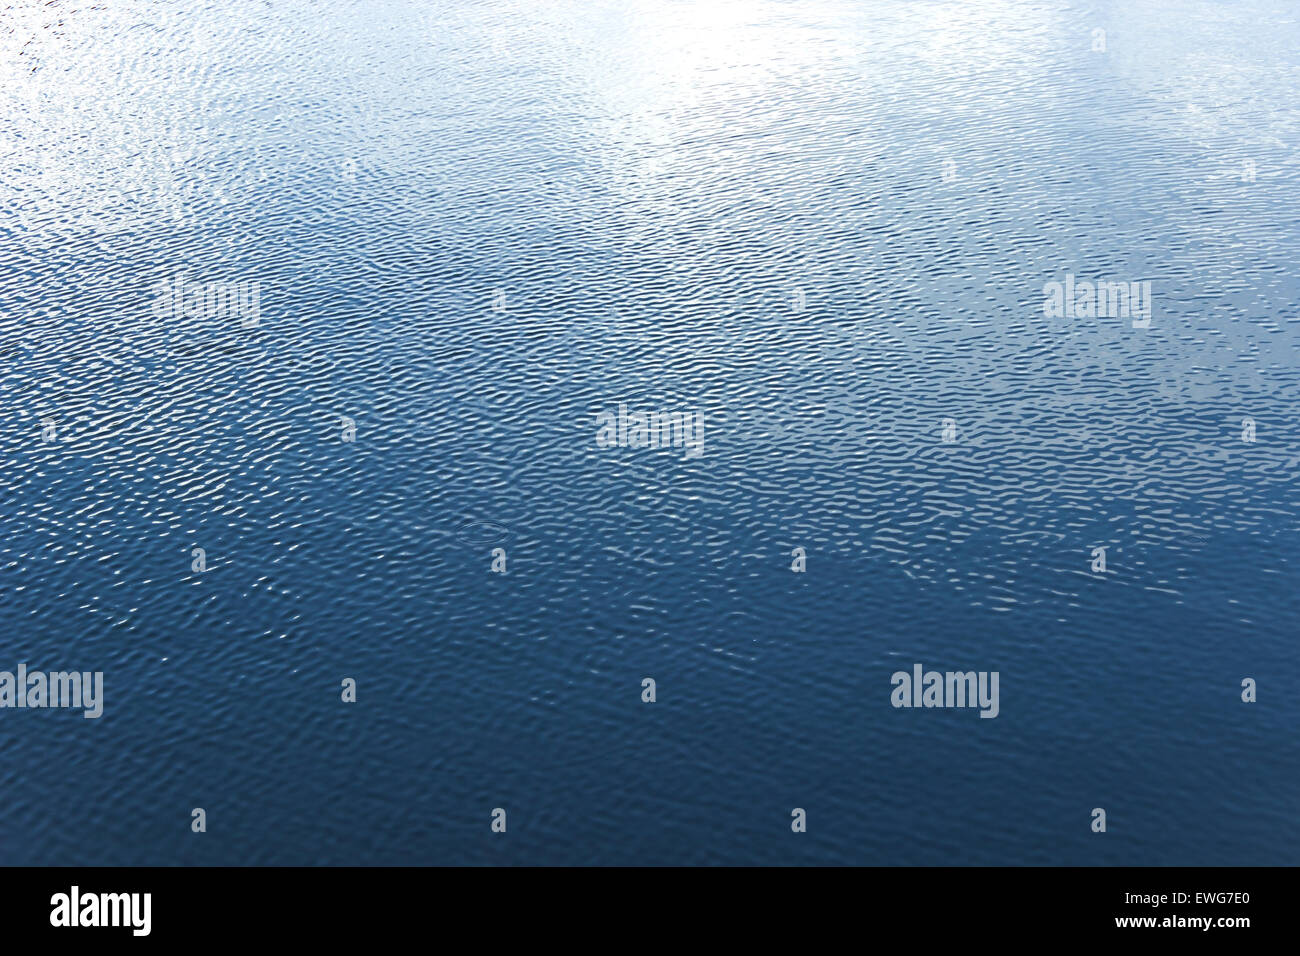 Ripple surface water background Stock Photo